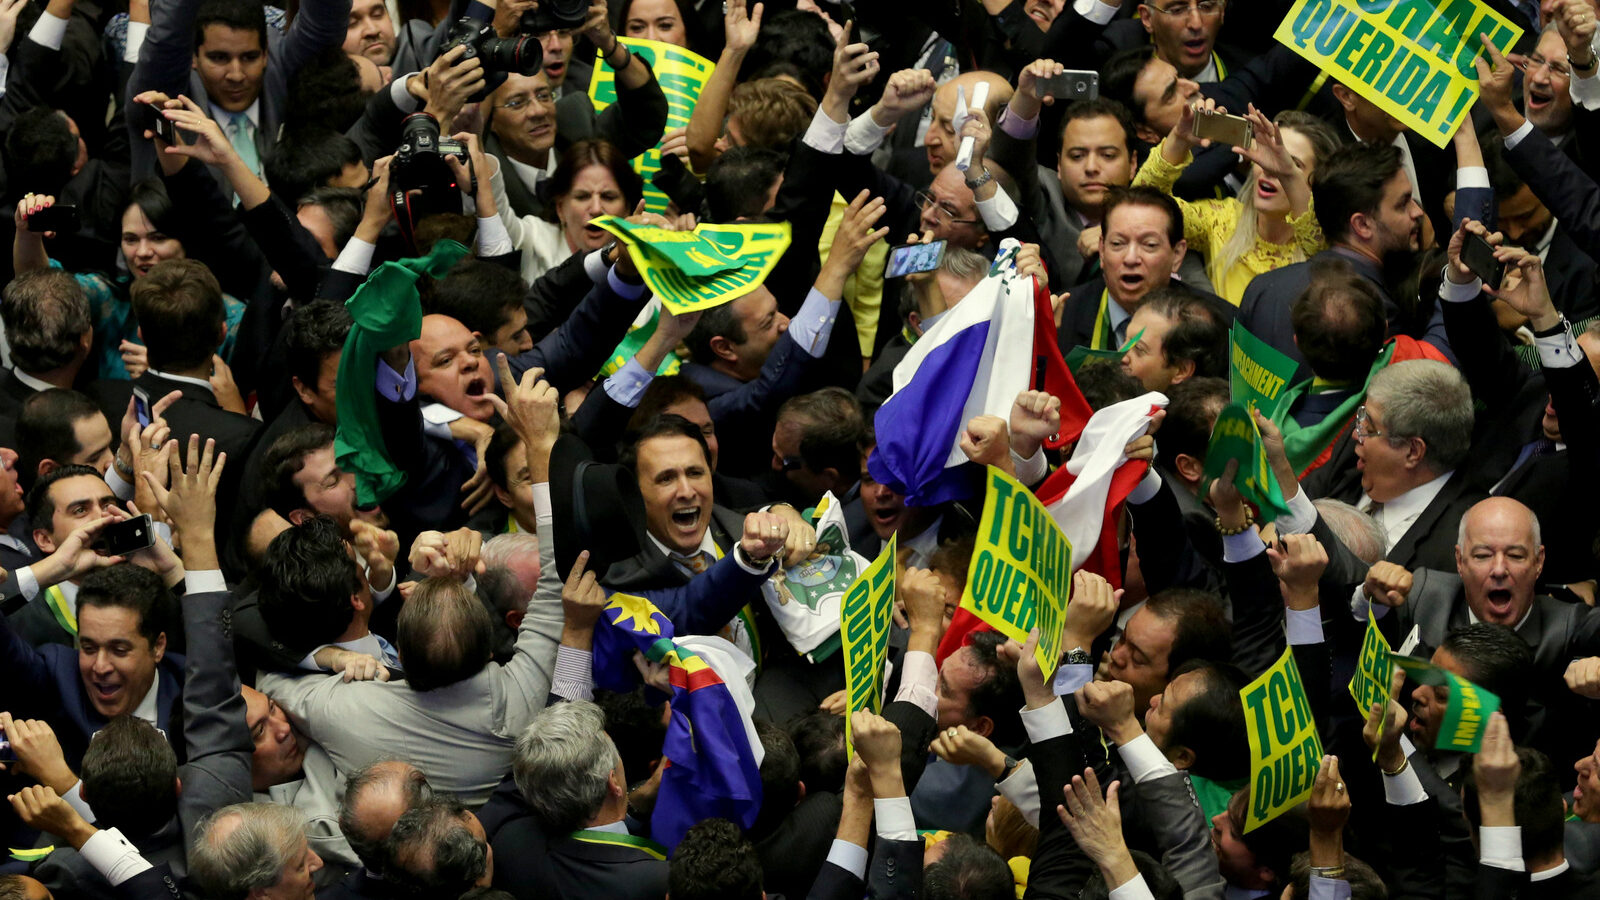 Opposition lawmakers celebrate after the lower house of Congress voted to impeach Brazil's President Dilma Rousseff in the Chamber of Deputies in Brasilia, Brazil, Sunday, April 17, 2016. The measure now goes to the Senate. Rousseff is accused of using accounting tricks in managing the federal budget to maintain spending and shore up support. (AP Photo/Eraldo Peres)